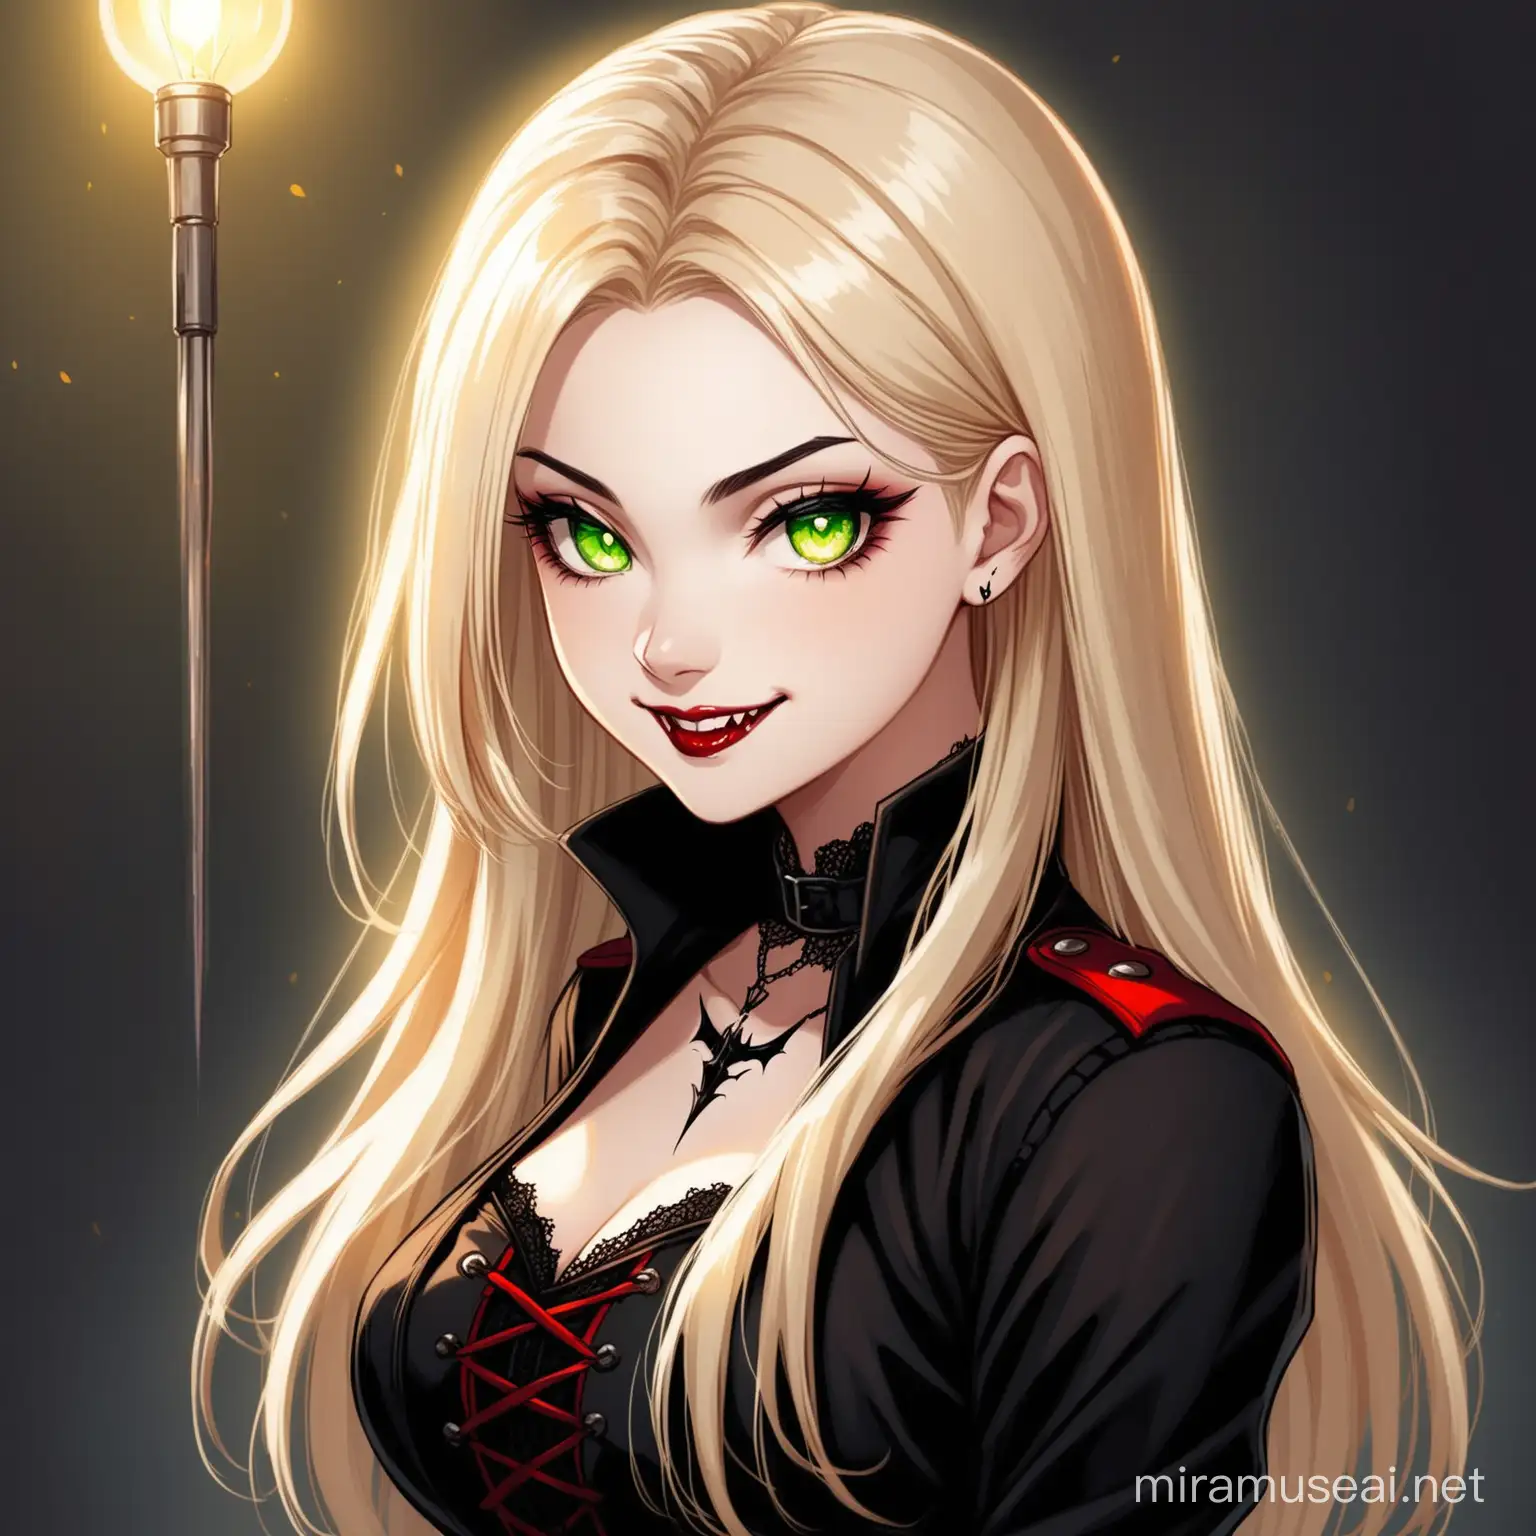 Playful Goth Woman with Blond Hair and Green Eyes Embracing Vampiric Aesthetic